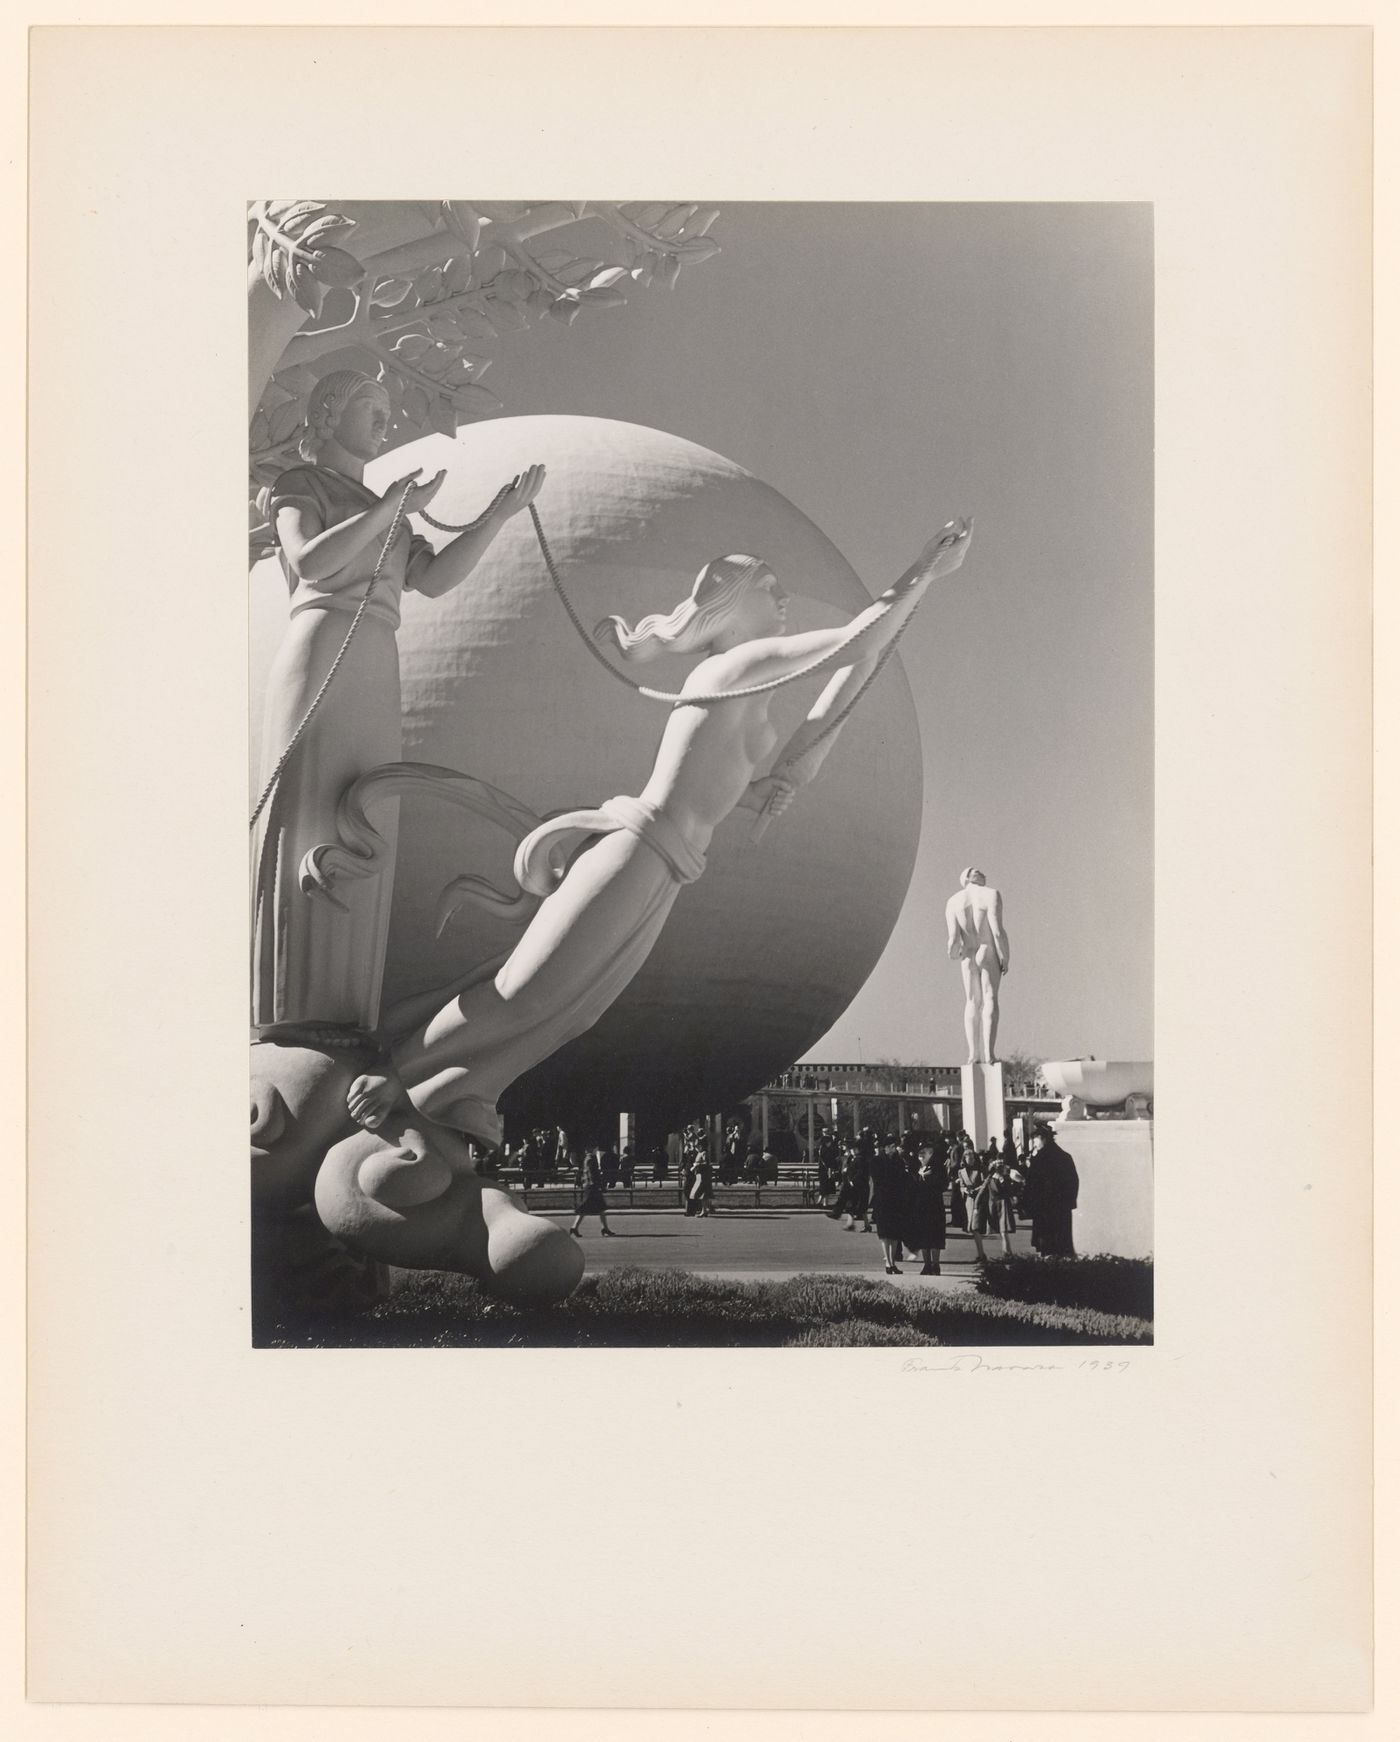 New York World's Fair (1939-1940): Close-up of two statues on the sculptural sundial, "Time and the Fates of Man", Perisphere Theme Center and Statue, "The Astronomer", in background